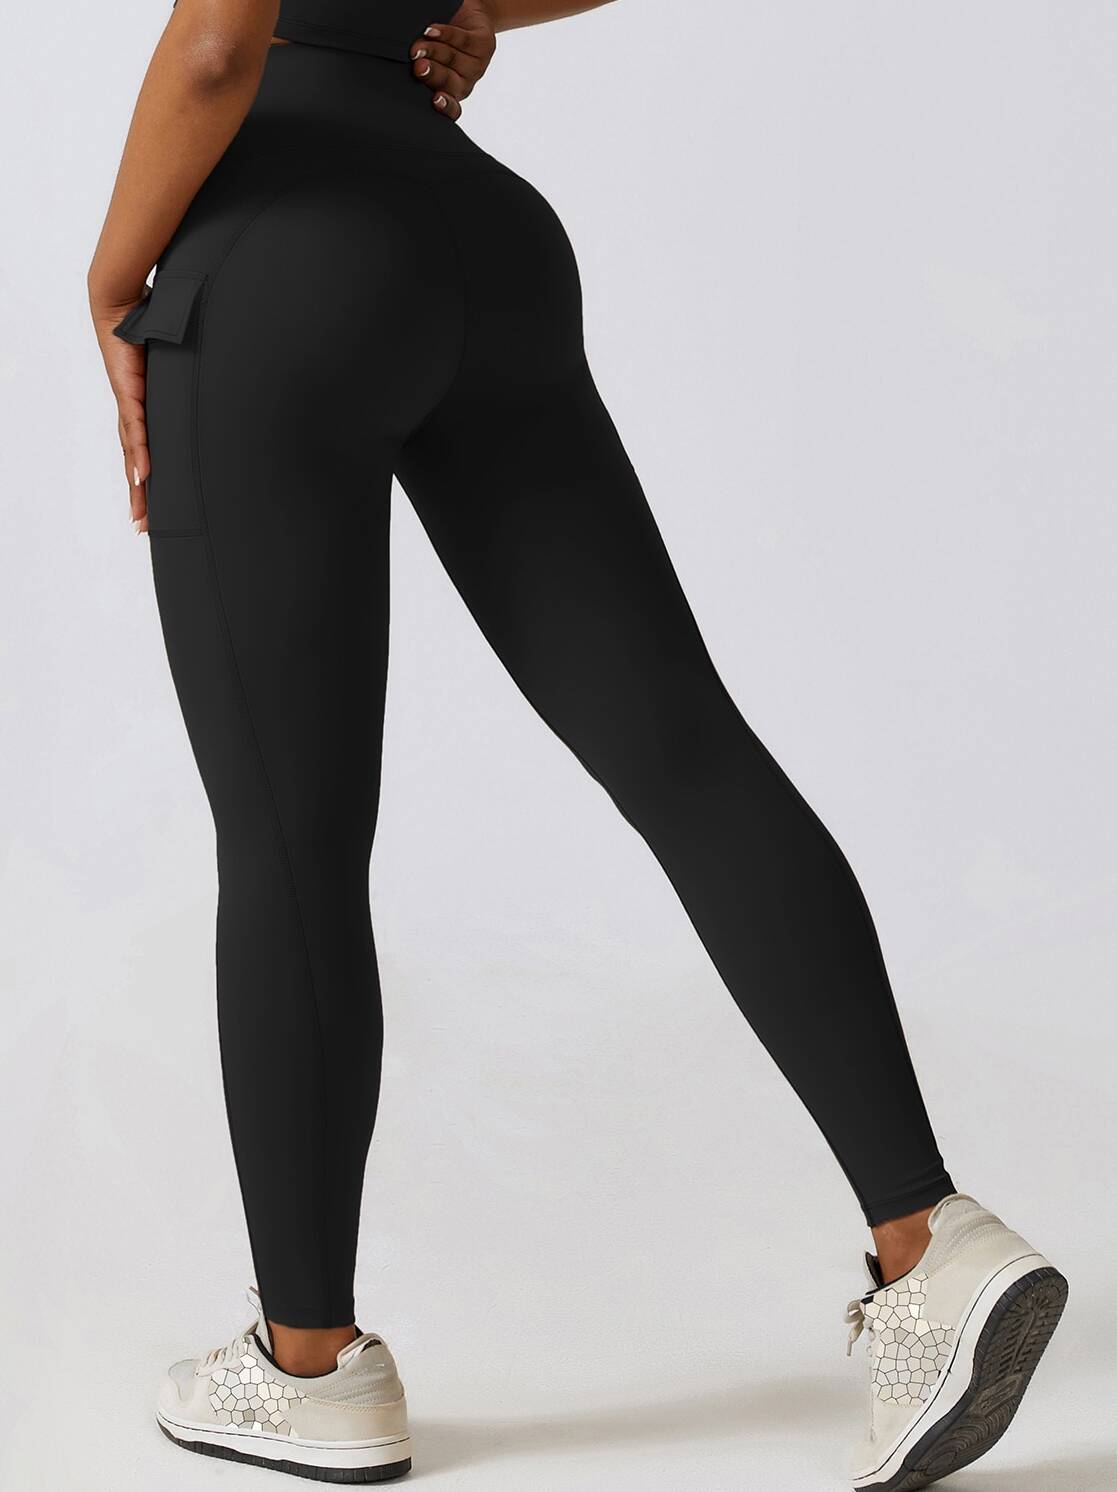 High Waist Leggings with Pockets for Women - Tummy Control